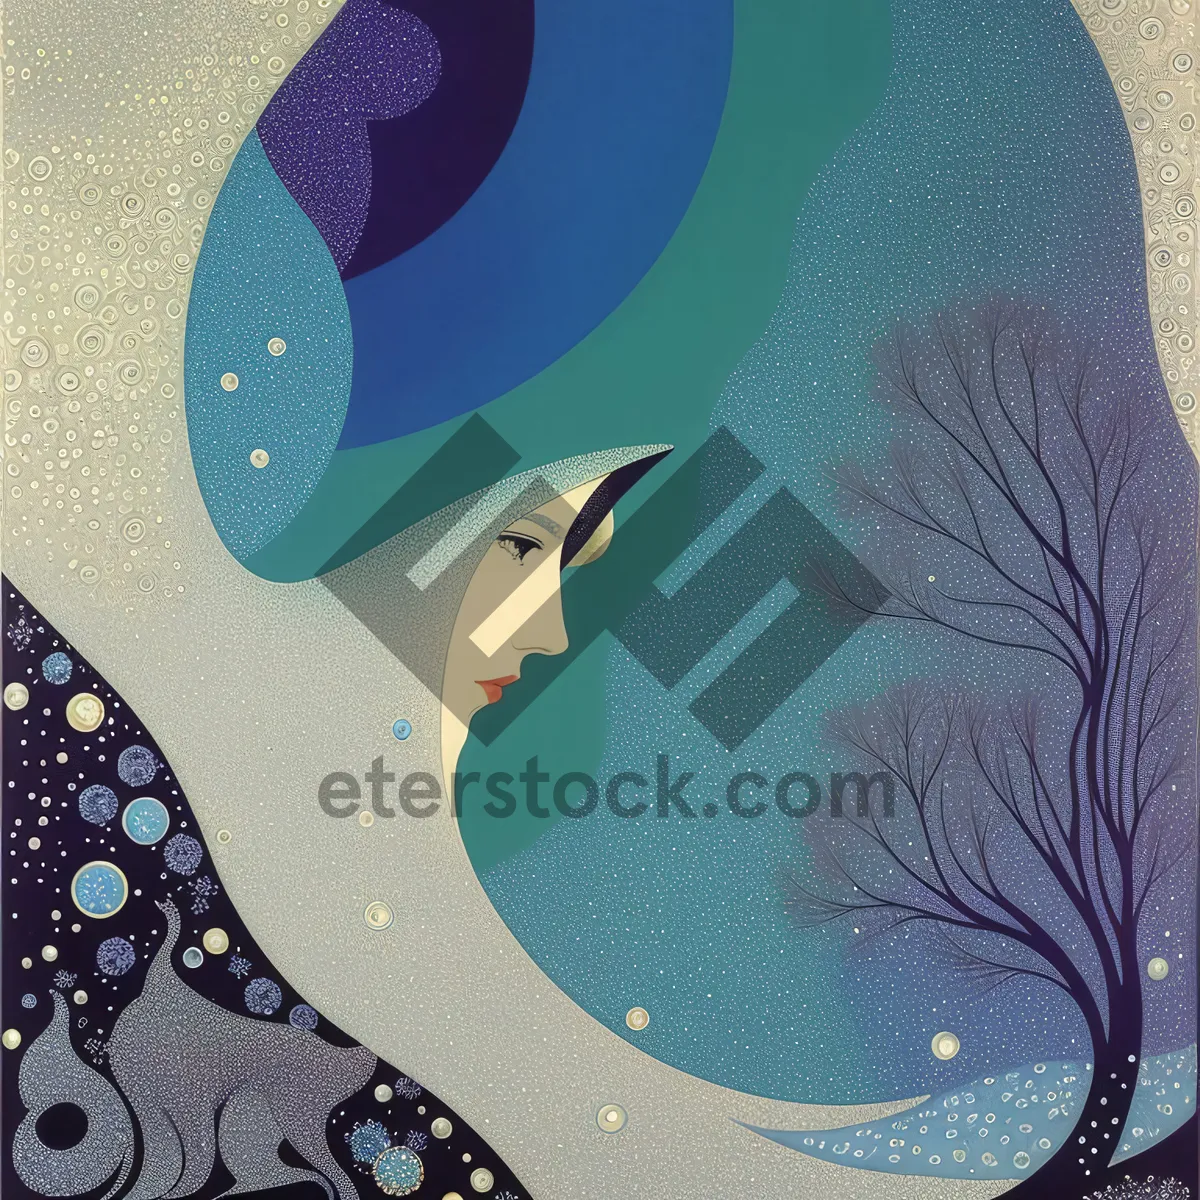 Picture of Artistic Moon Design in Bib Pattern